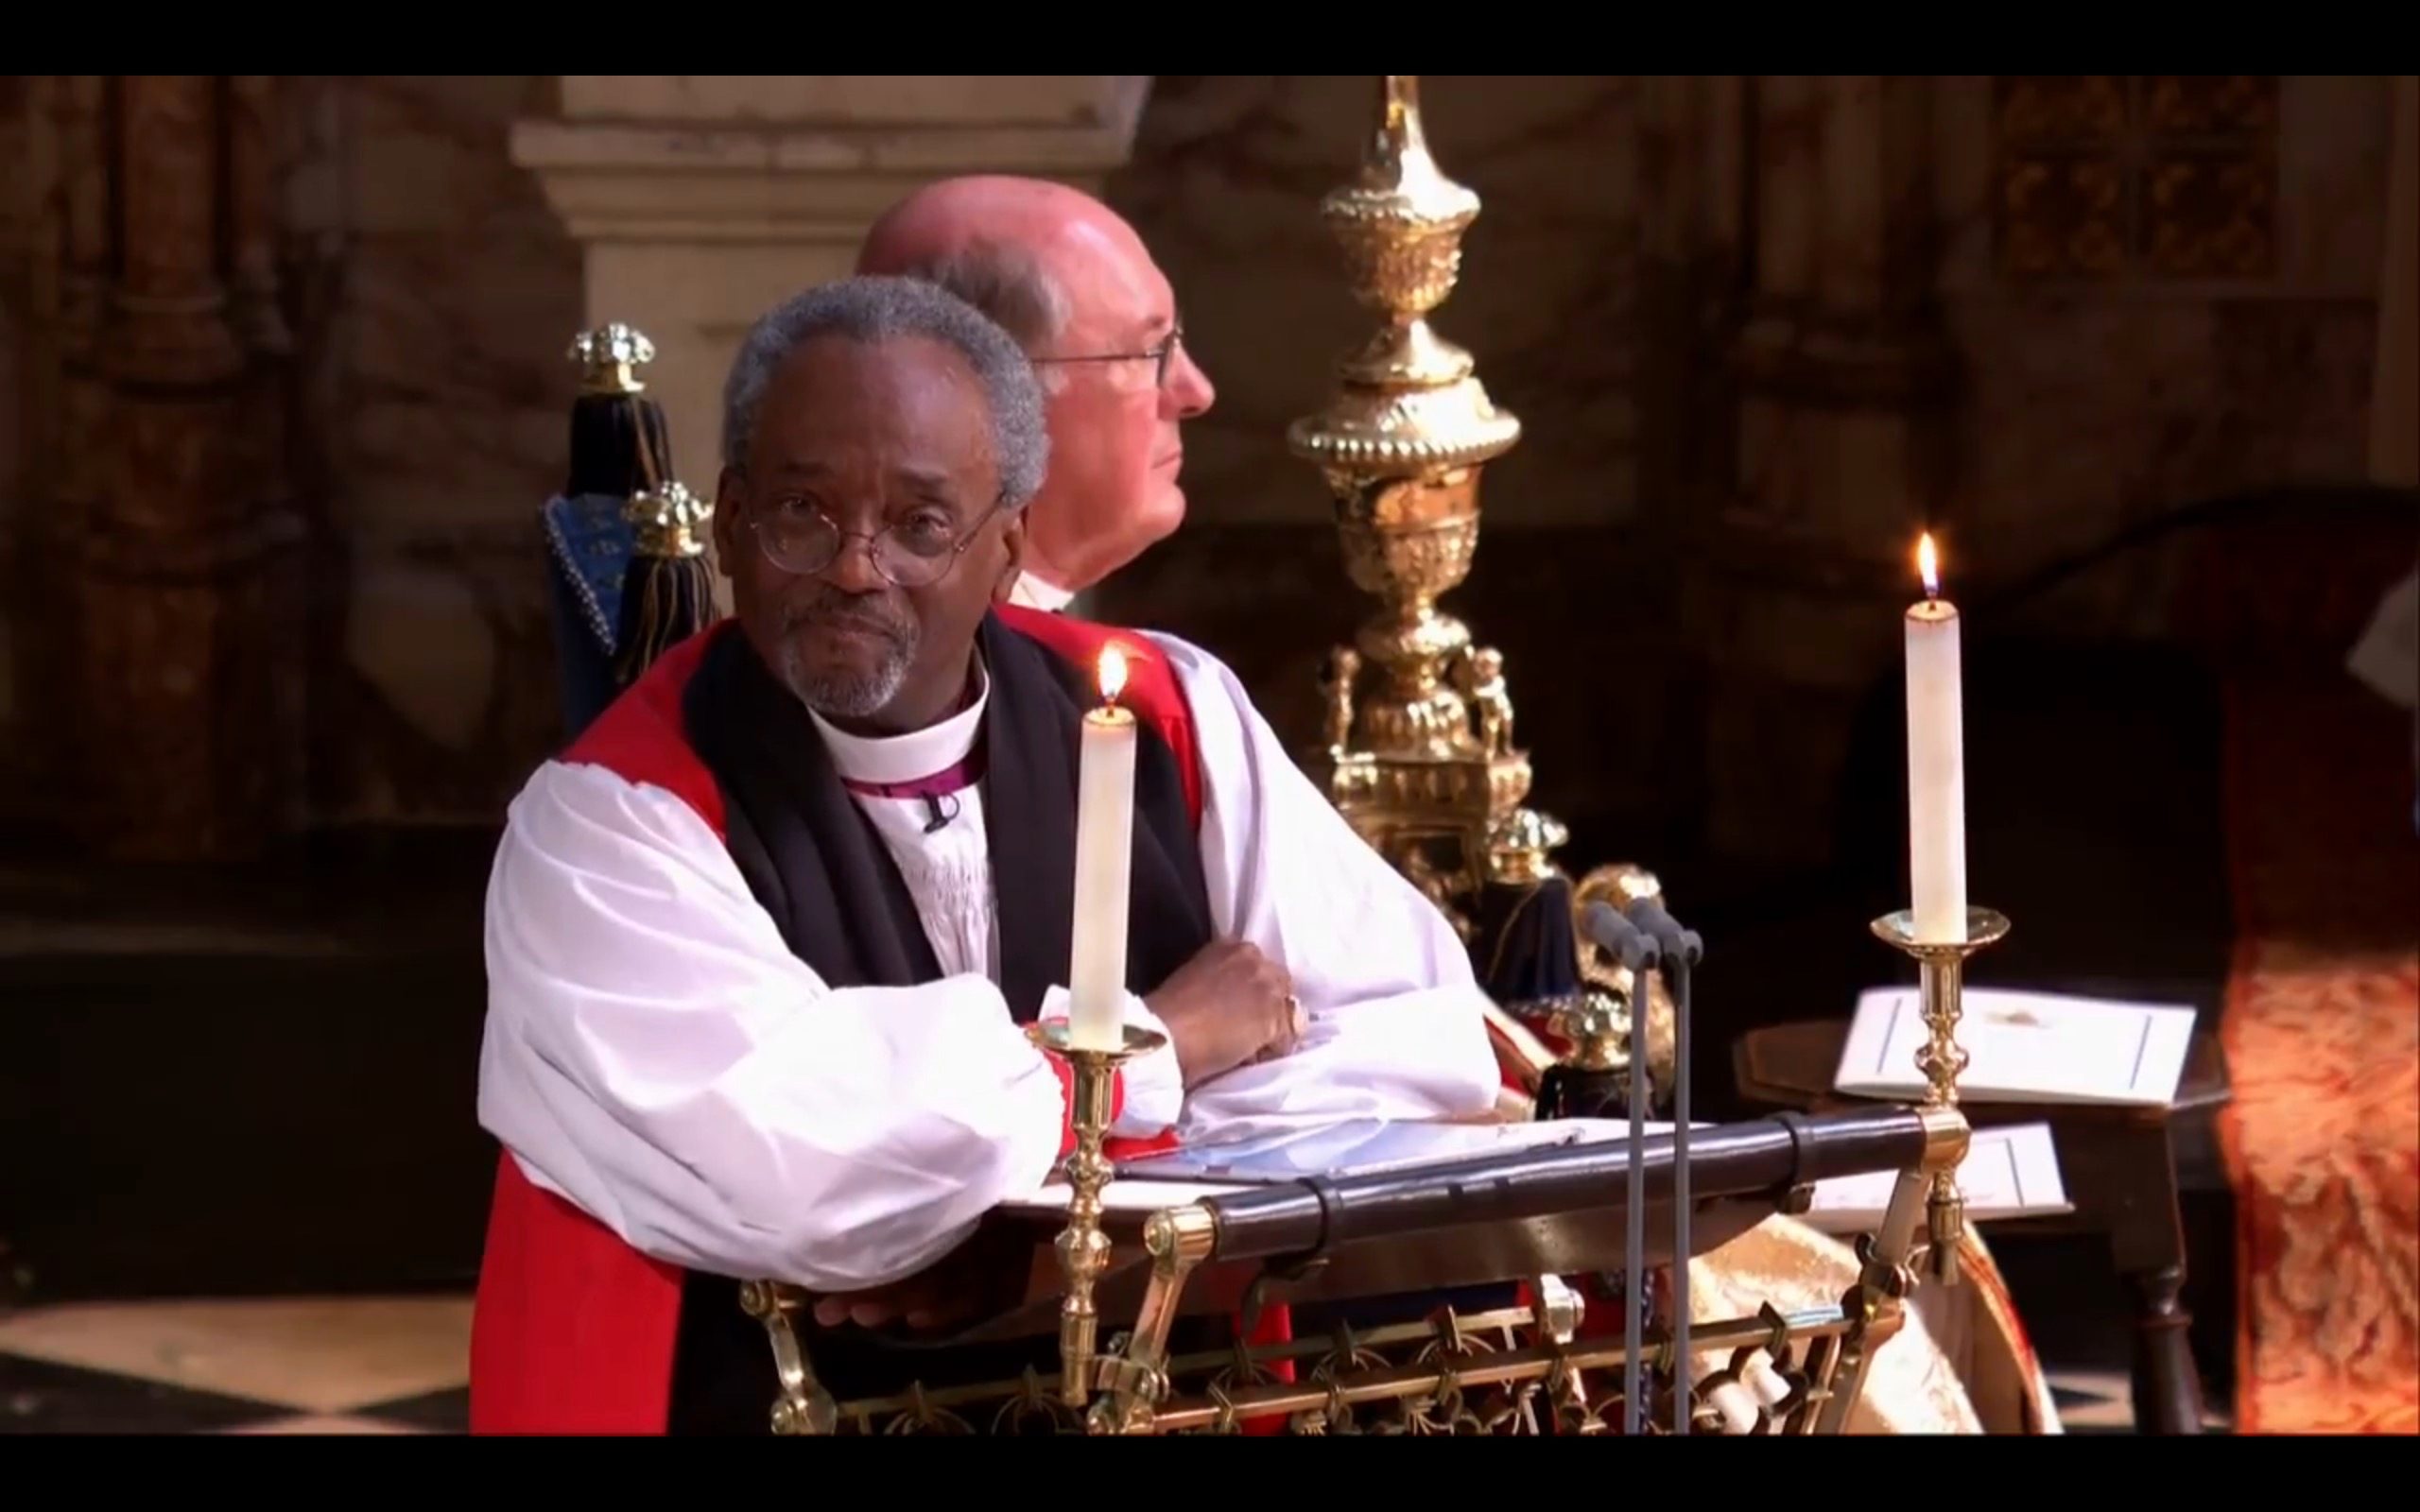 Reverend Curry fires up royal wedding with love sermon